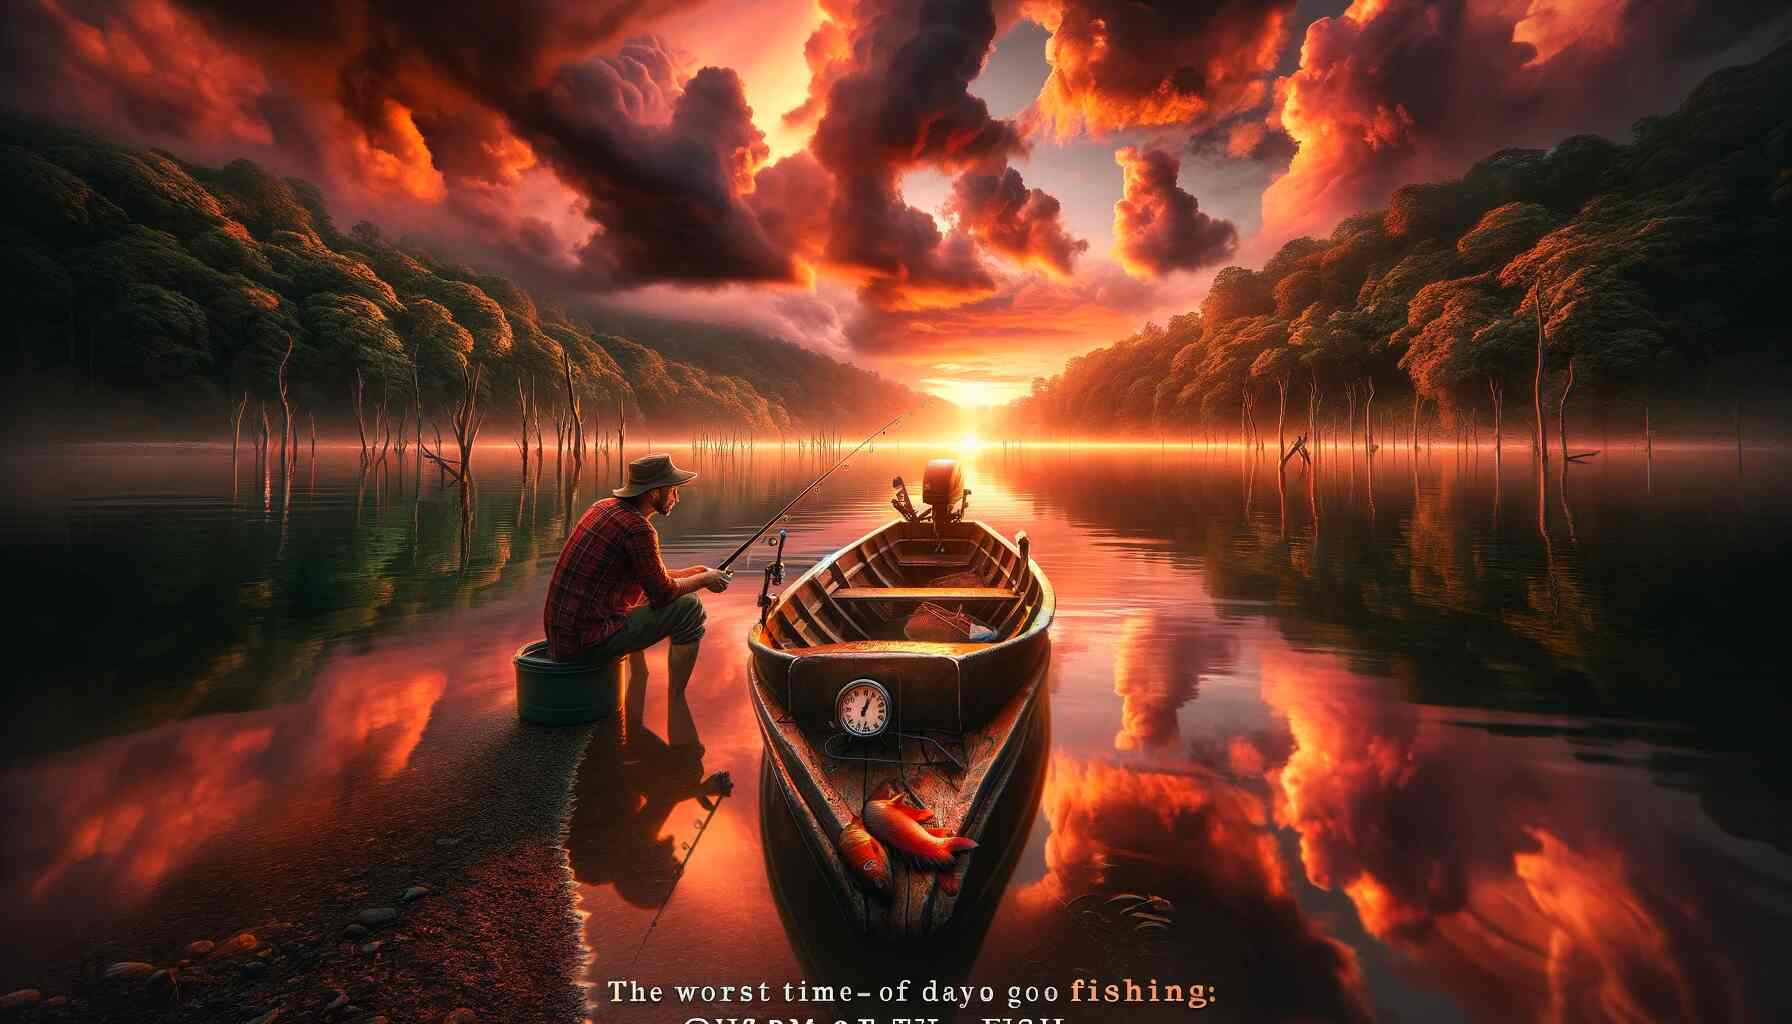 An image showing a serene lake at sunset with a striking orange and pink sky reflecting on the water. A lone, empty fishing boat floats on the calm, glass-like lake, surrounded by lush green trees. In the foreground, a disappointed fisherman sits on the shore, holding an empty fishing line and gazing contemplatively at the boat, symbolizing the challenge of fishing at the wrong time of day. The title 'The Worst Time of Day to Go Fishing: Outsmart the Fish' is displayed in an elegant font at the top of the image.